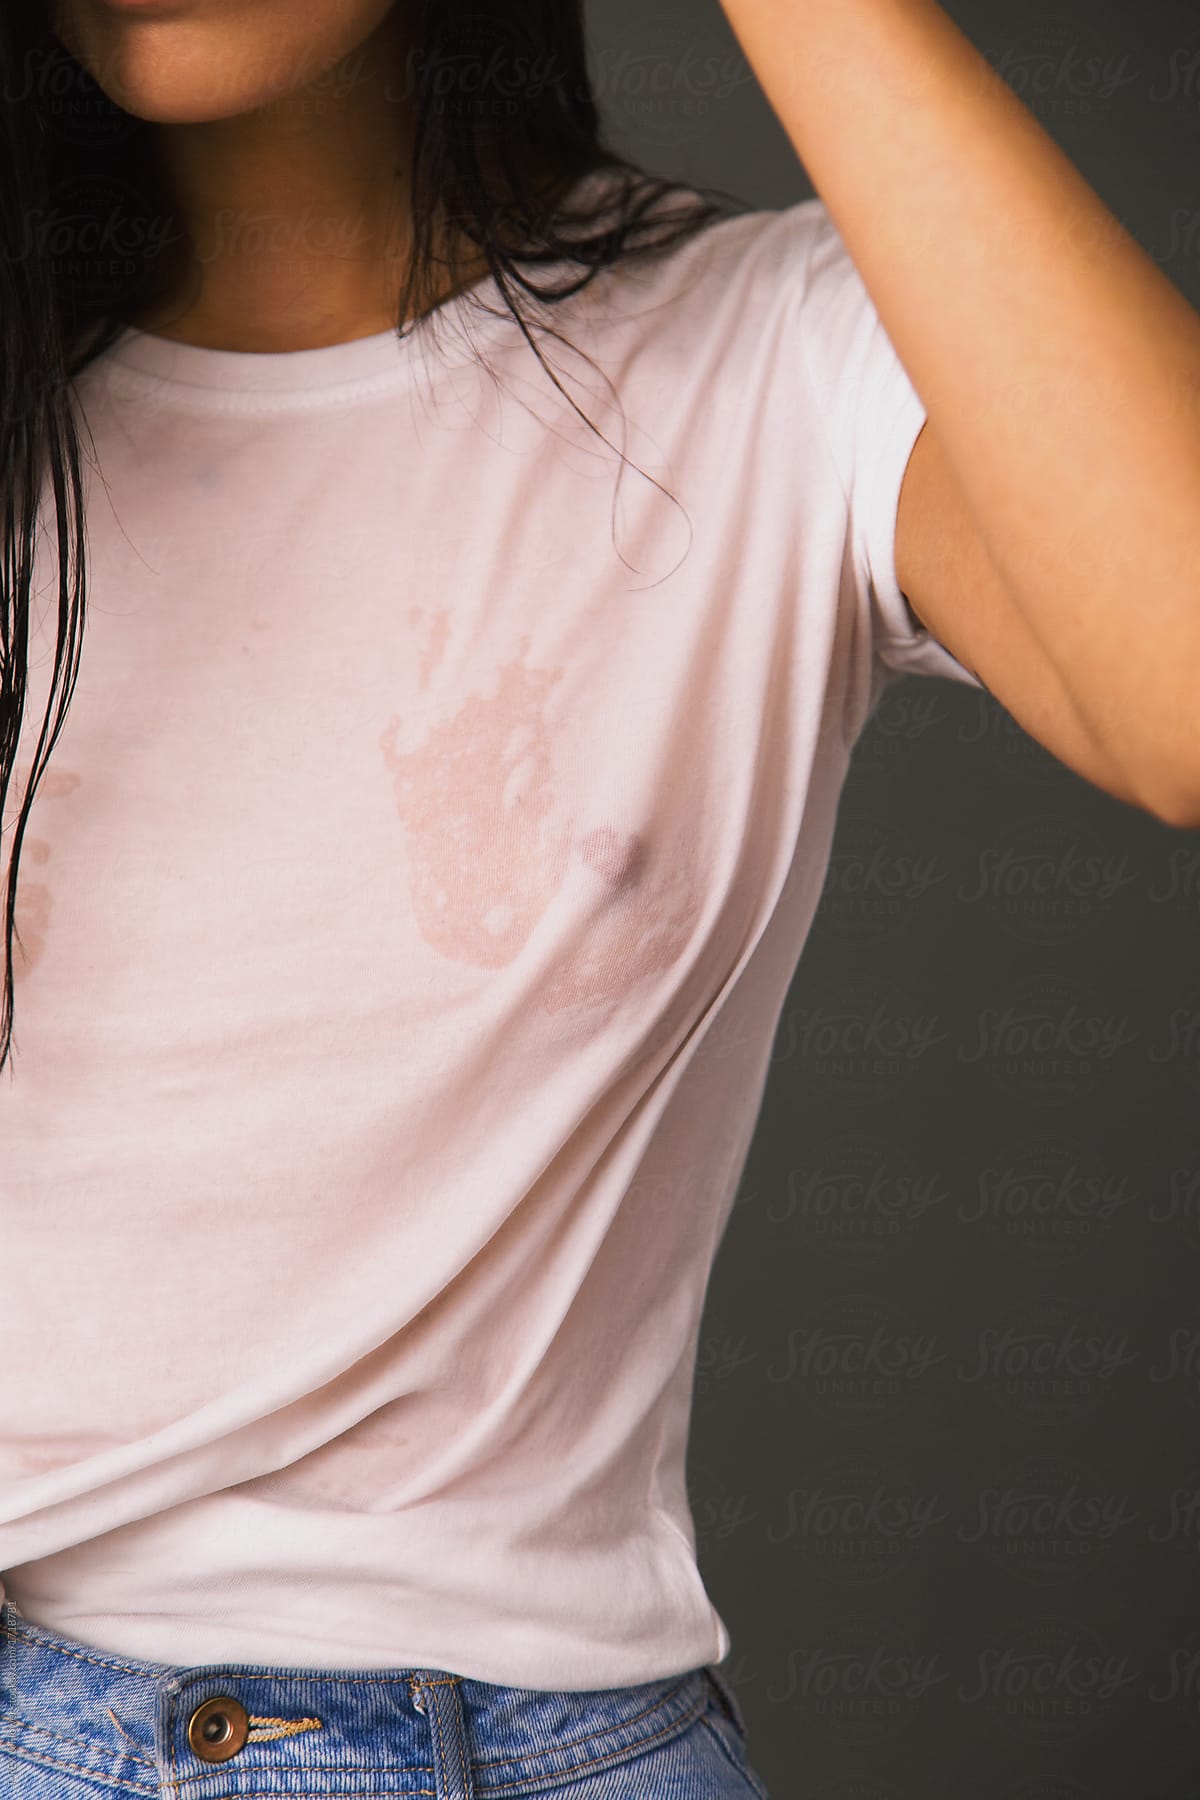 girl in wet t shirts